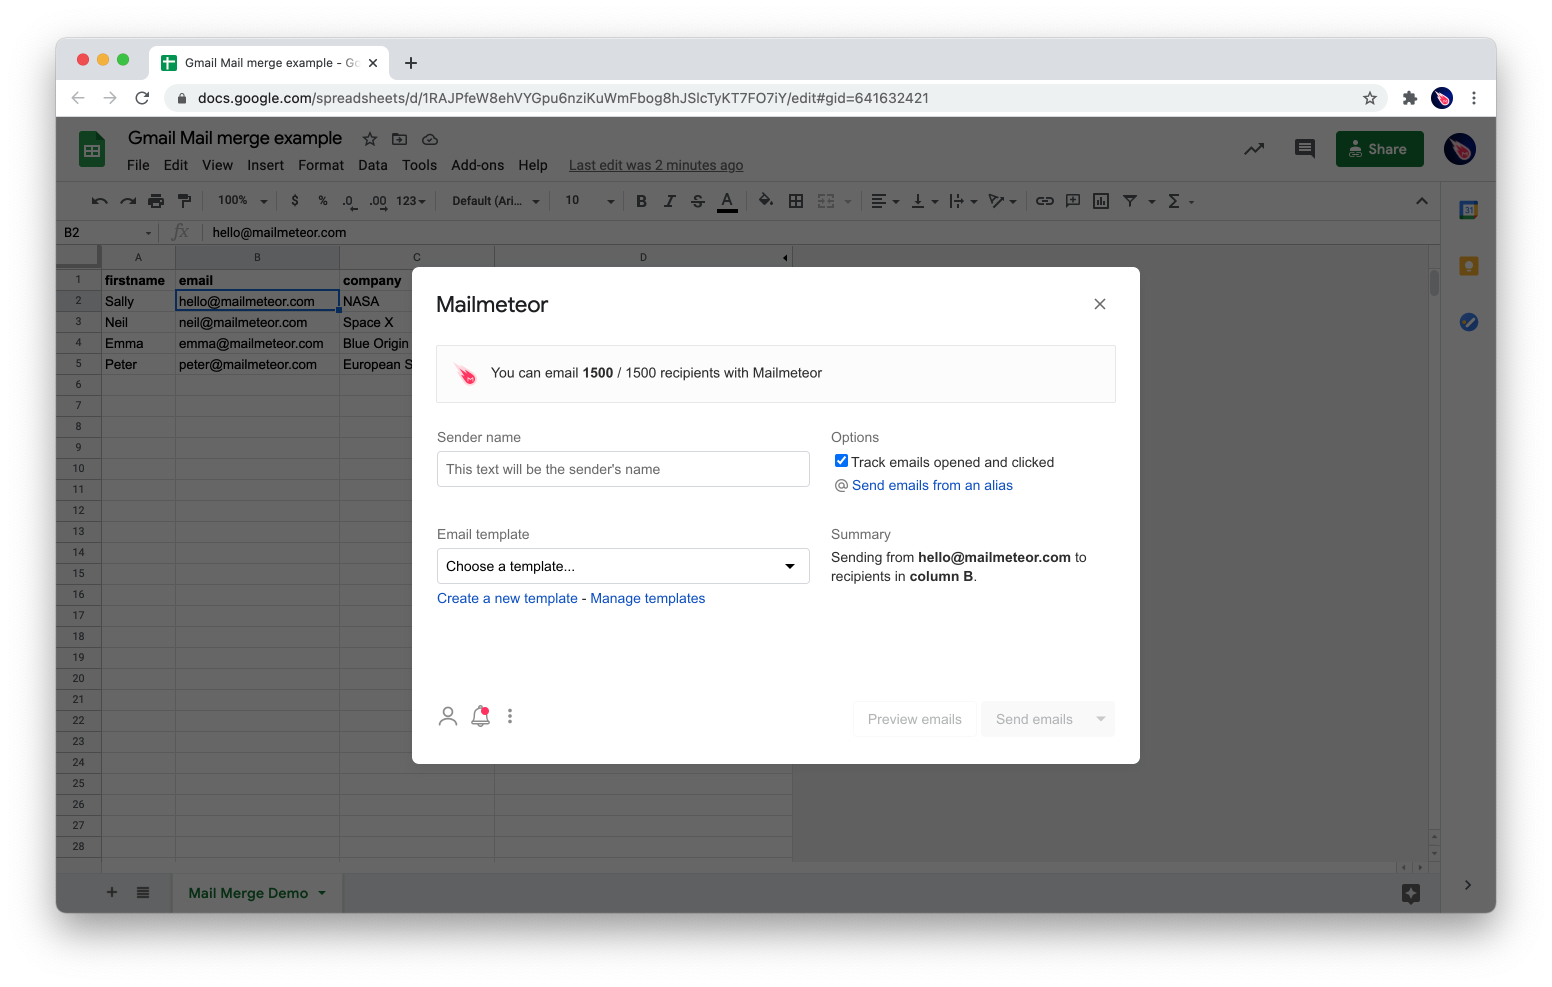 Open Mailmeteor add-on to send mass emails in Google Sheets